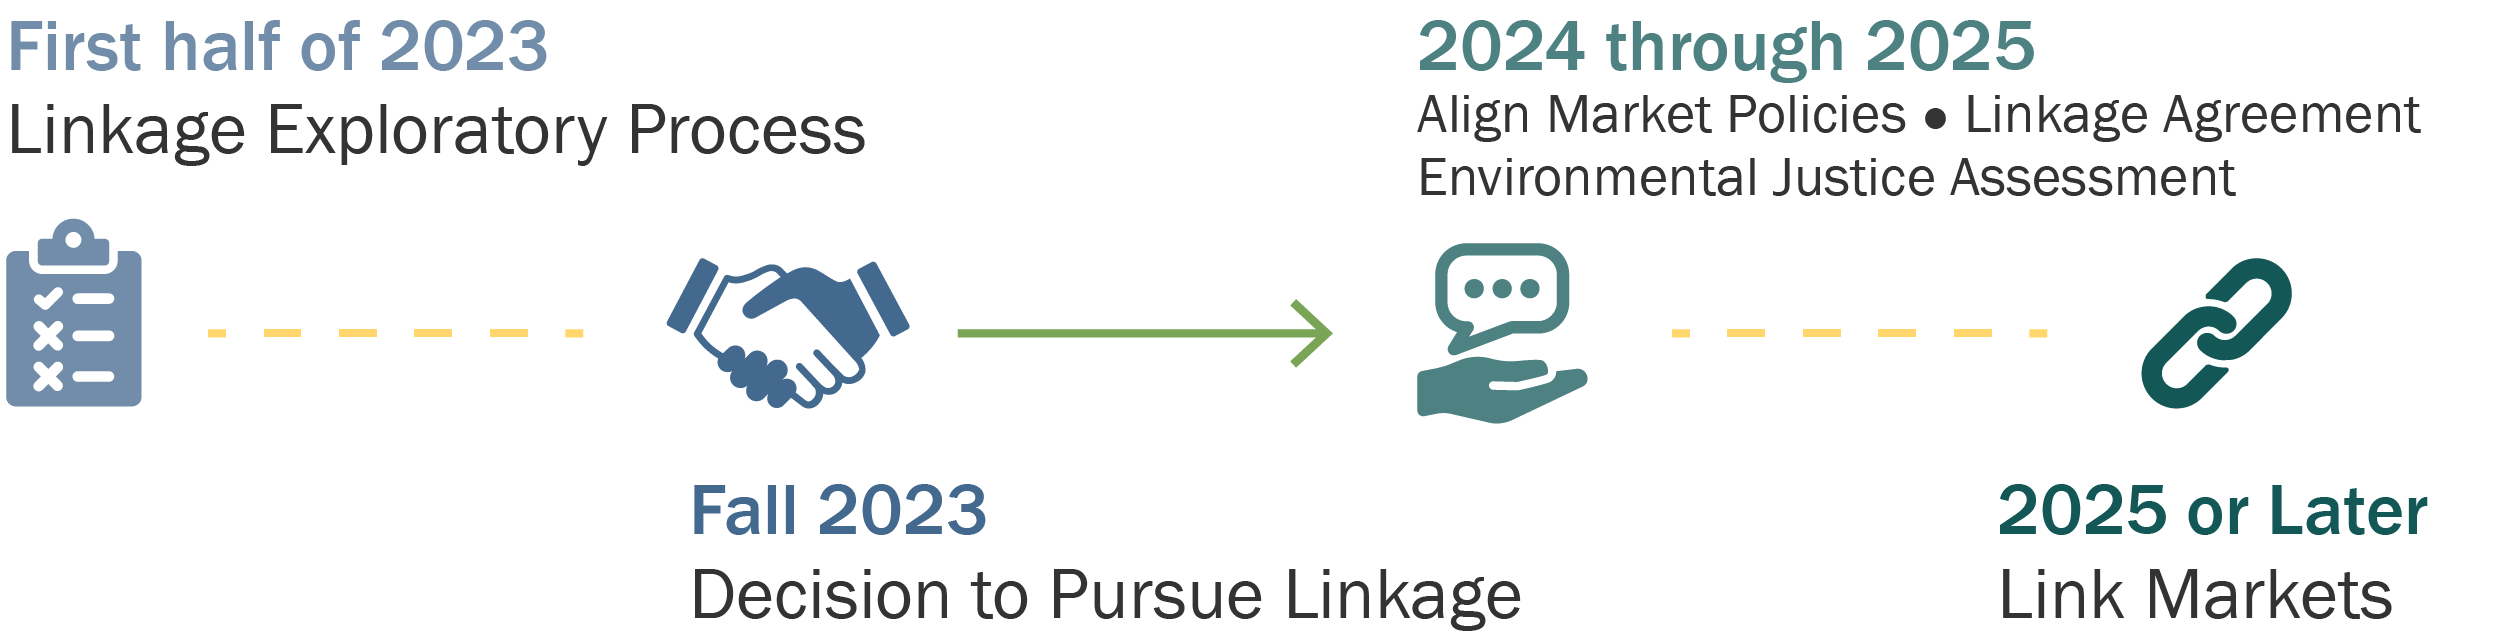 General timeline for the linkage process from now until 2024. Details are covered in the text below.